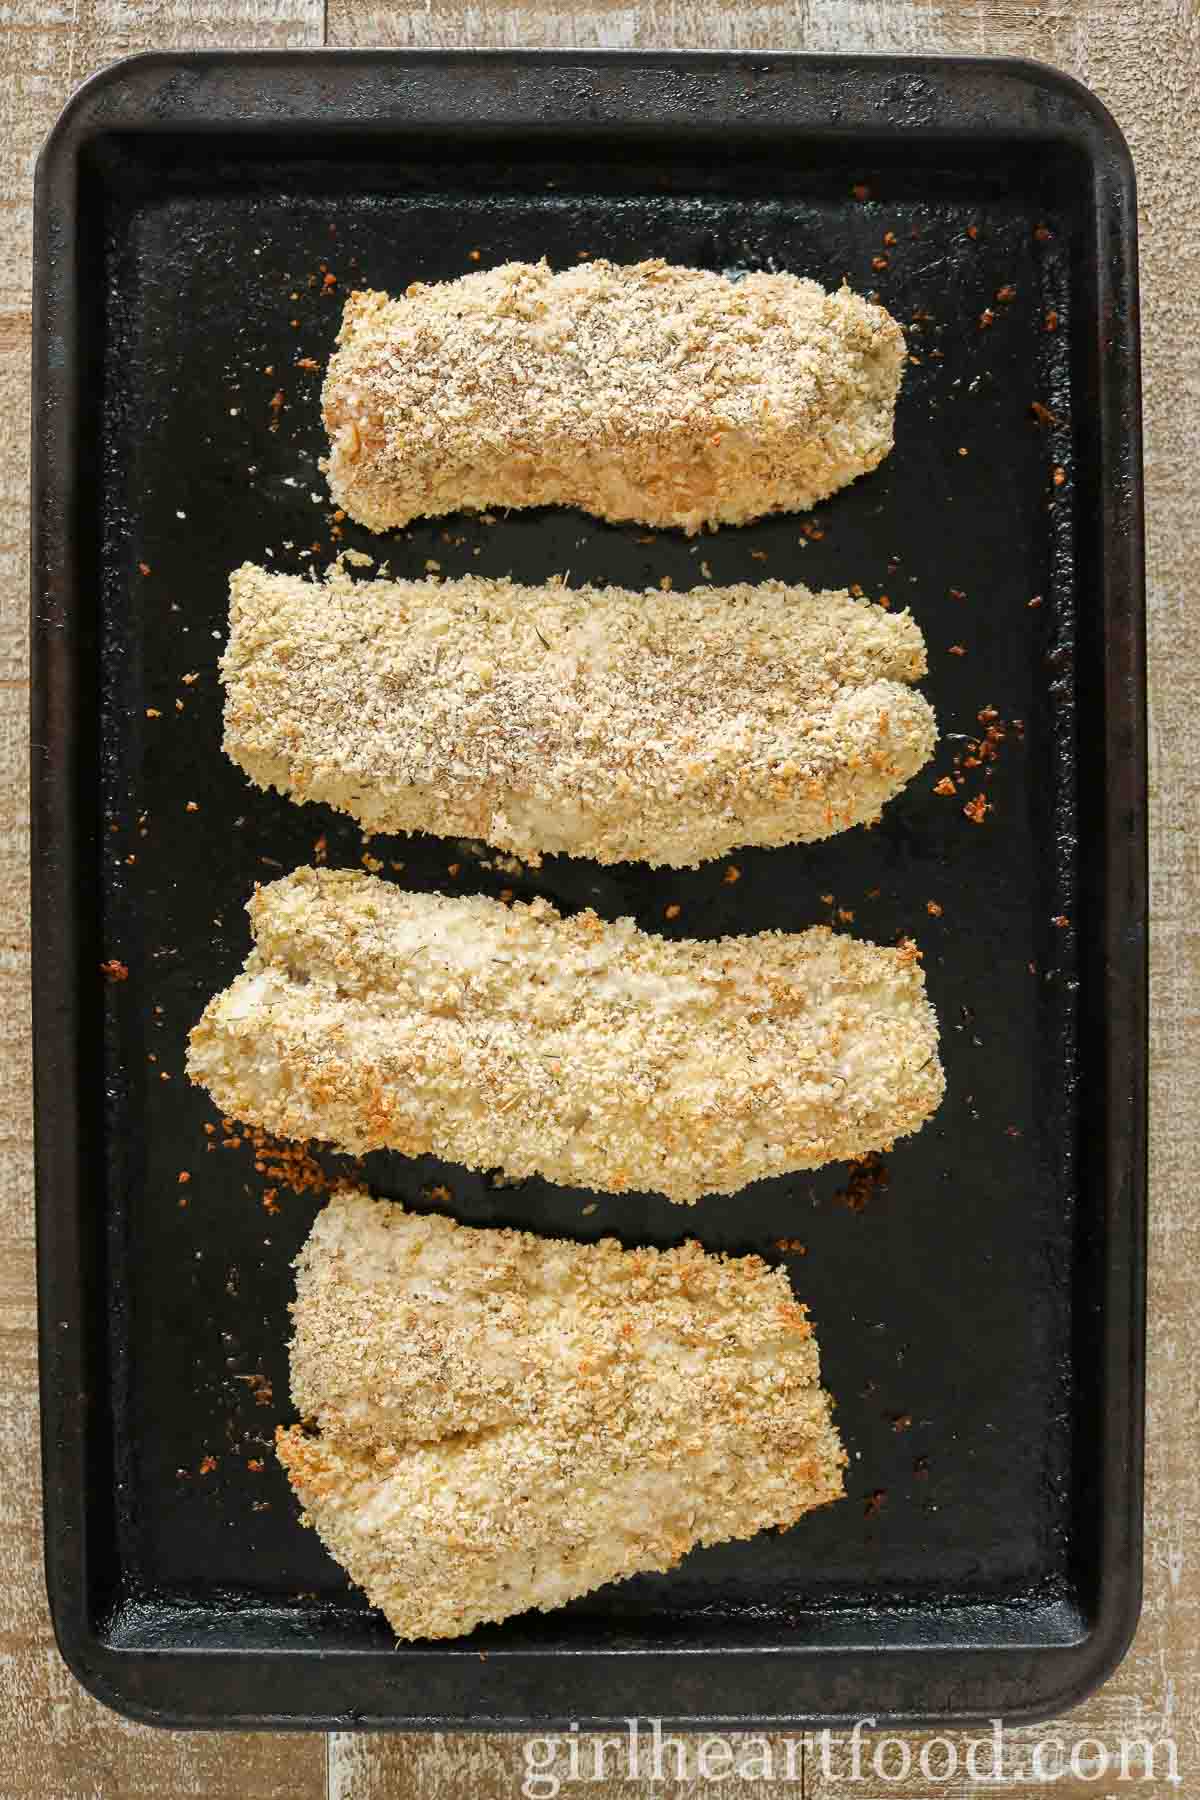 Four panko-coated cod fillets on a sheet pan after baking.